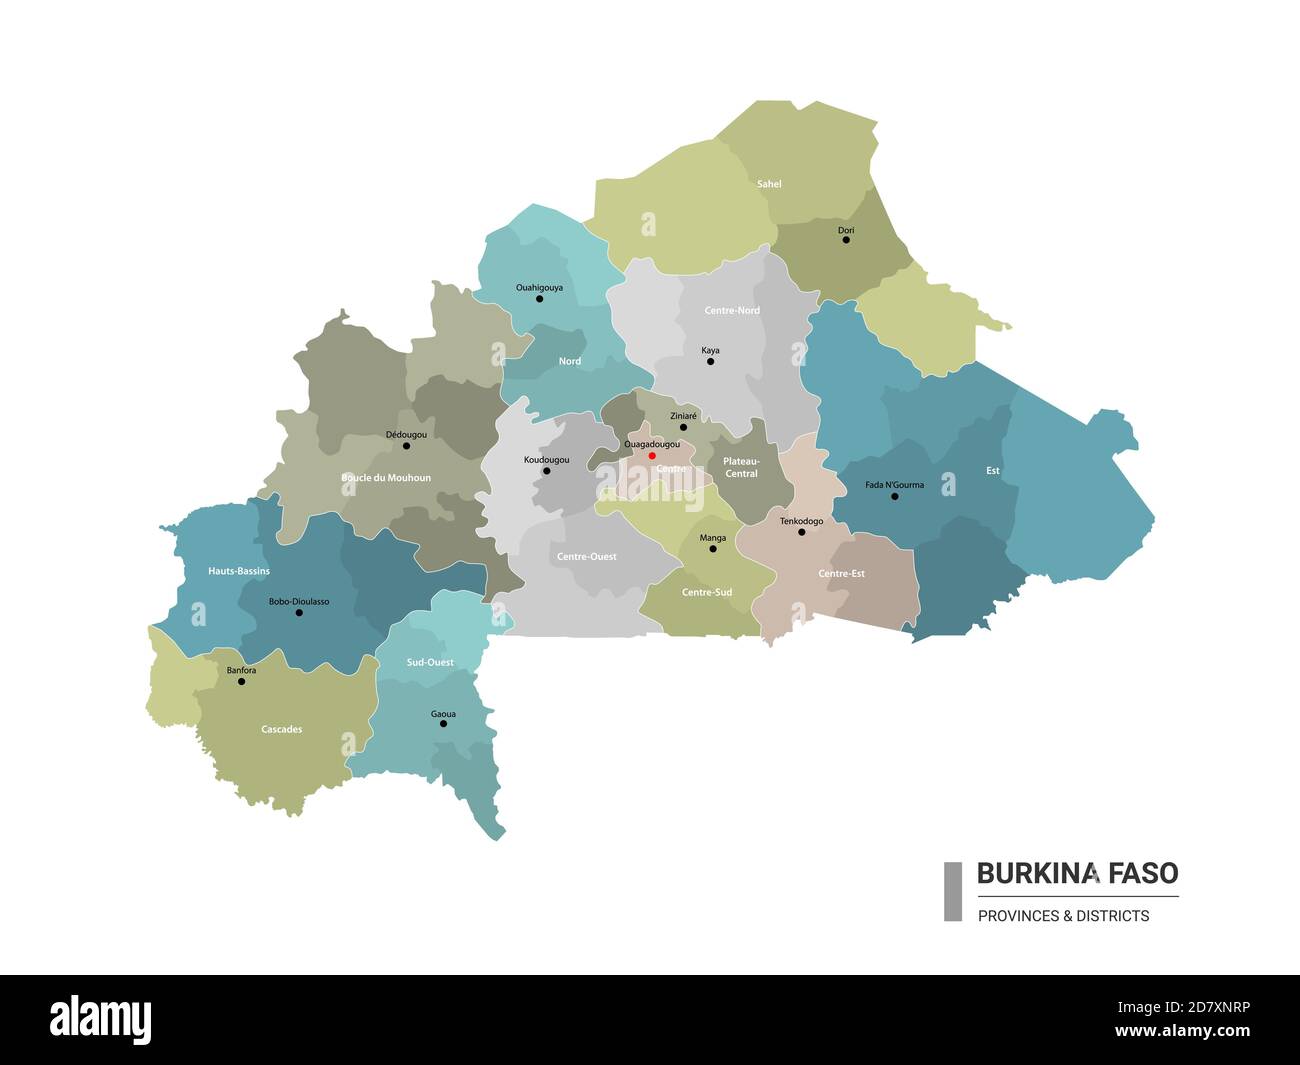 Burkina Faso higt detailed map with subdivisions. Administrative map of Burkina Faso with districts and cities name, colored by states and administrat Stock Vector